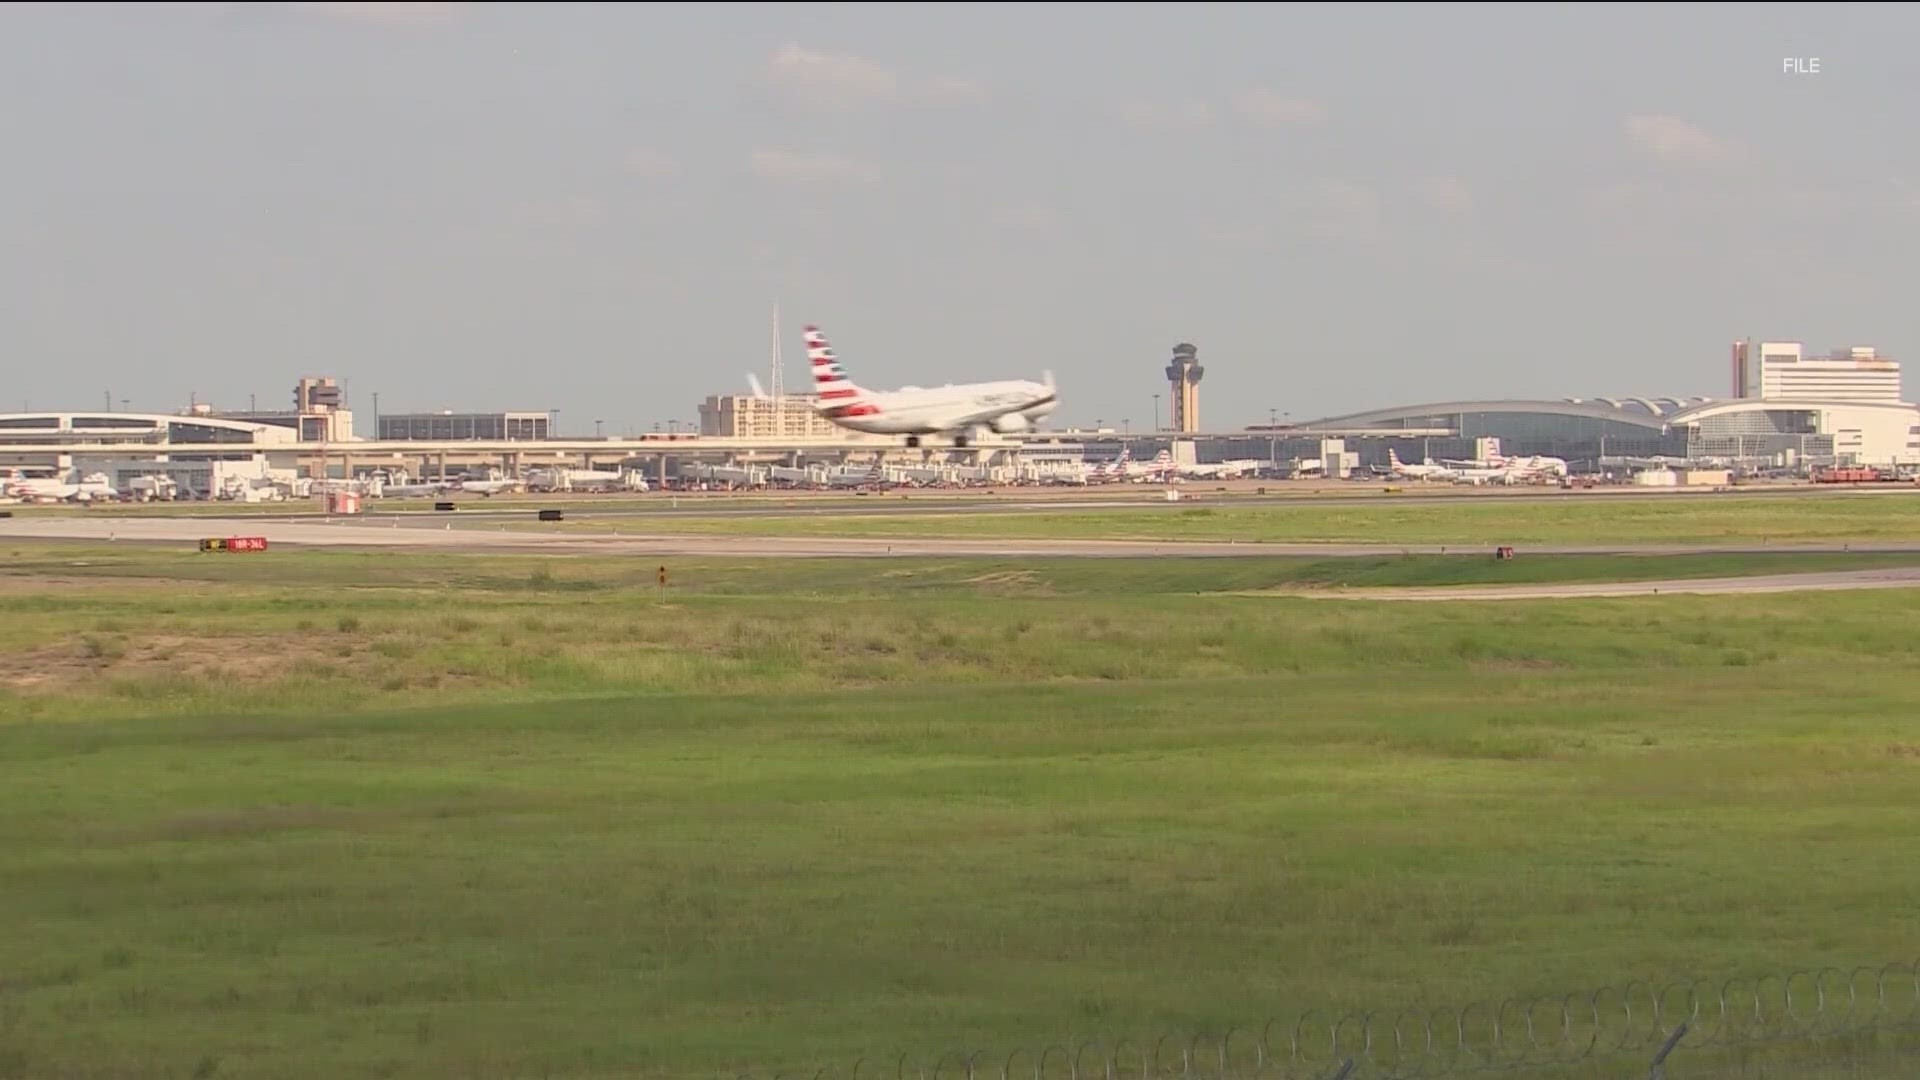 The FAA has announced big updates are coming, and Austin's airport will be the first to see some of them. It comes after several close calls.